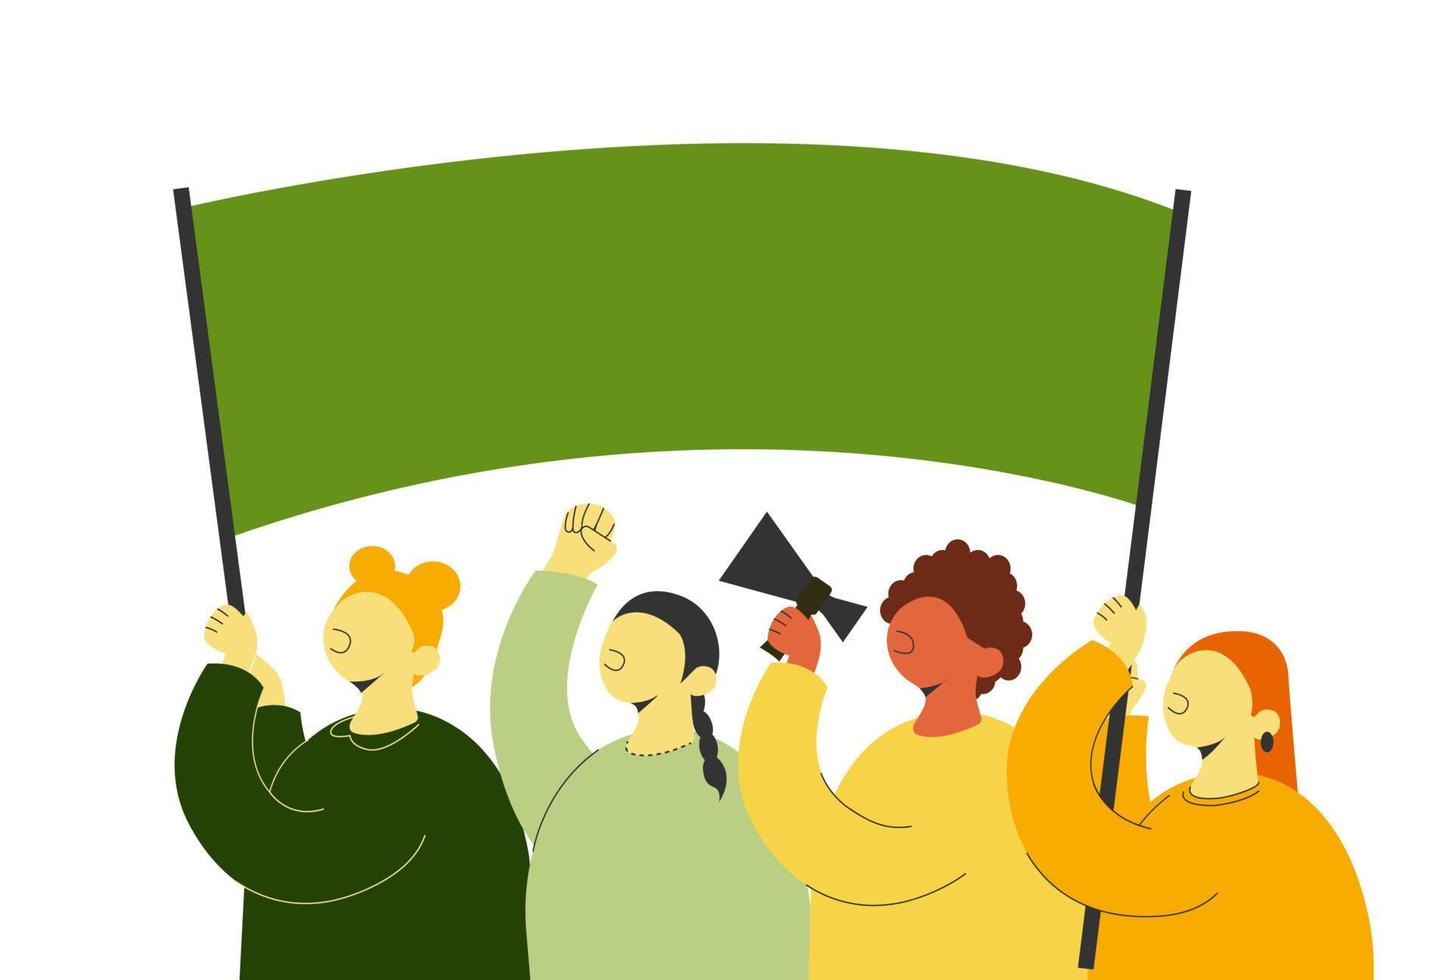 Crowd of protesters with fist raised and megaphone and flag at demonstration. Place for text. Vector illustration